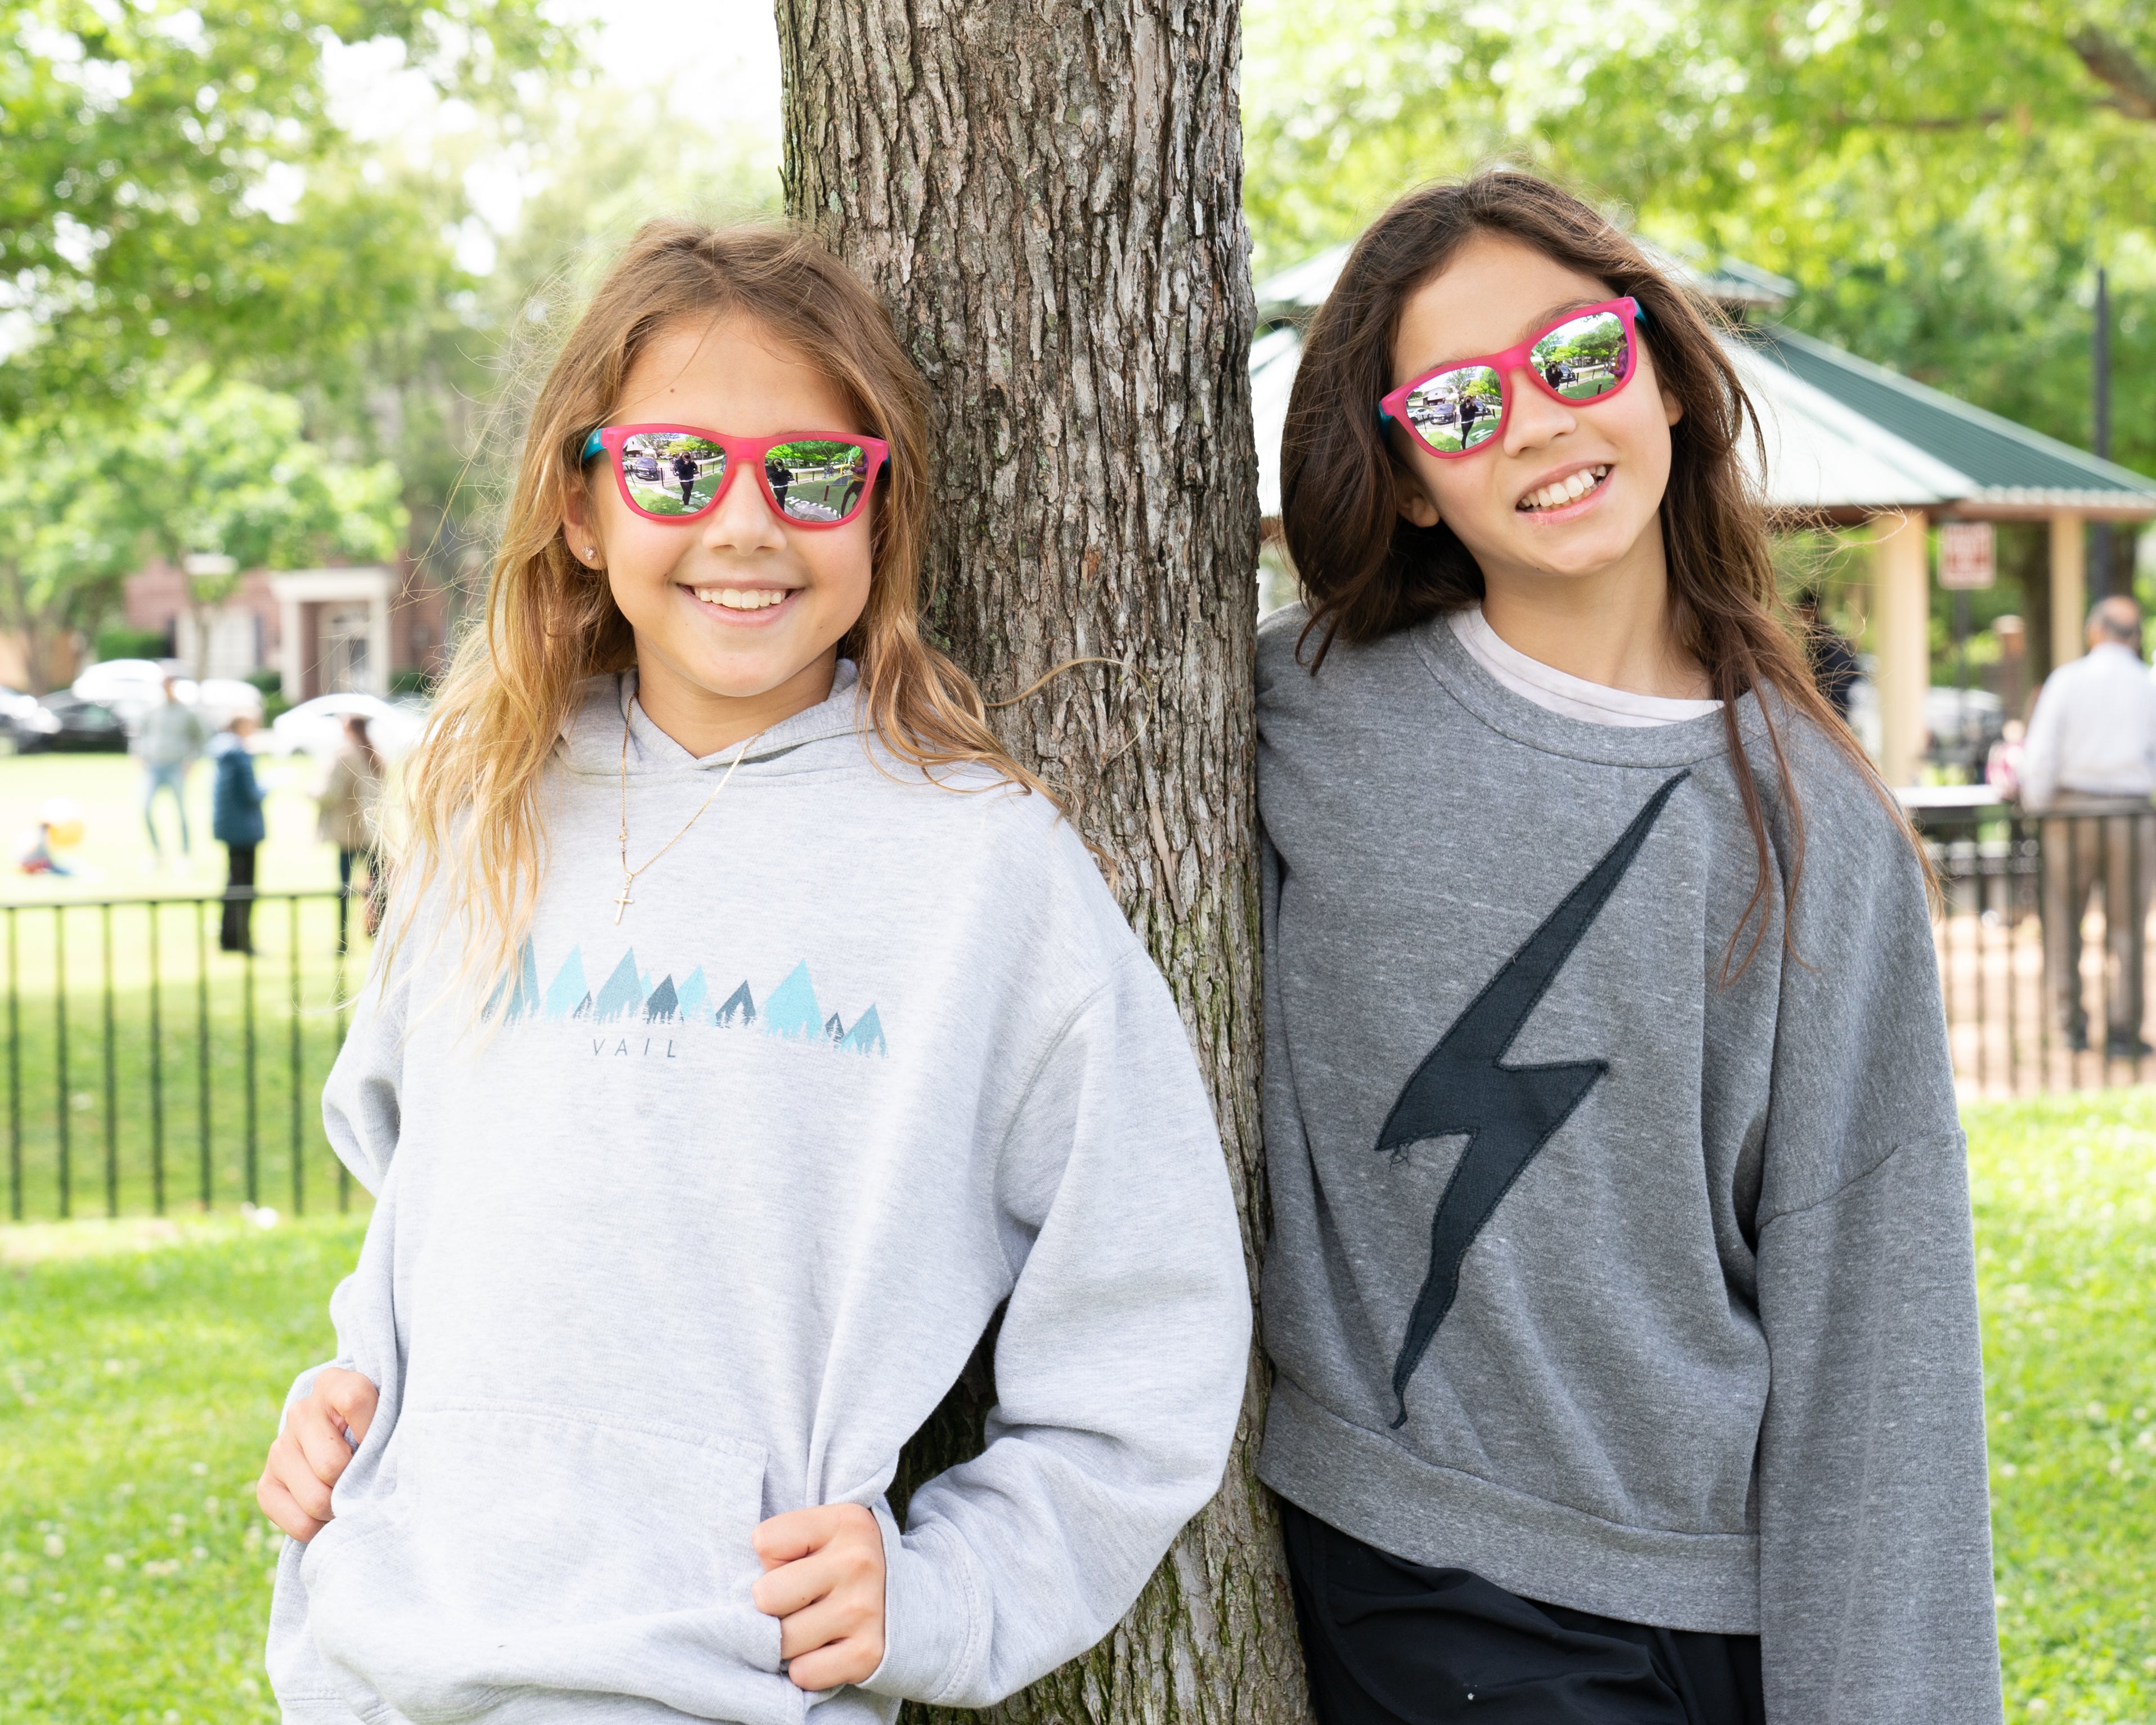 Can Cool Kids Sunglasses Really Make a Difference in Eye Health?